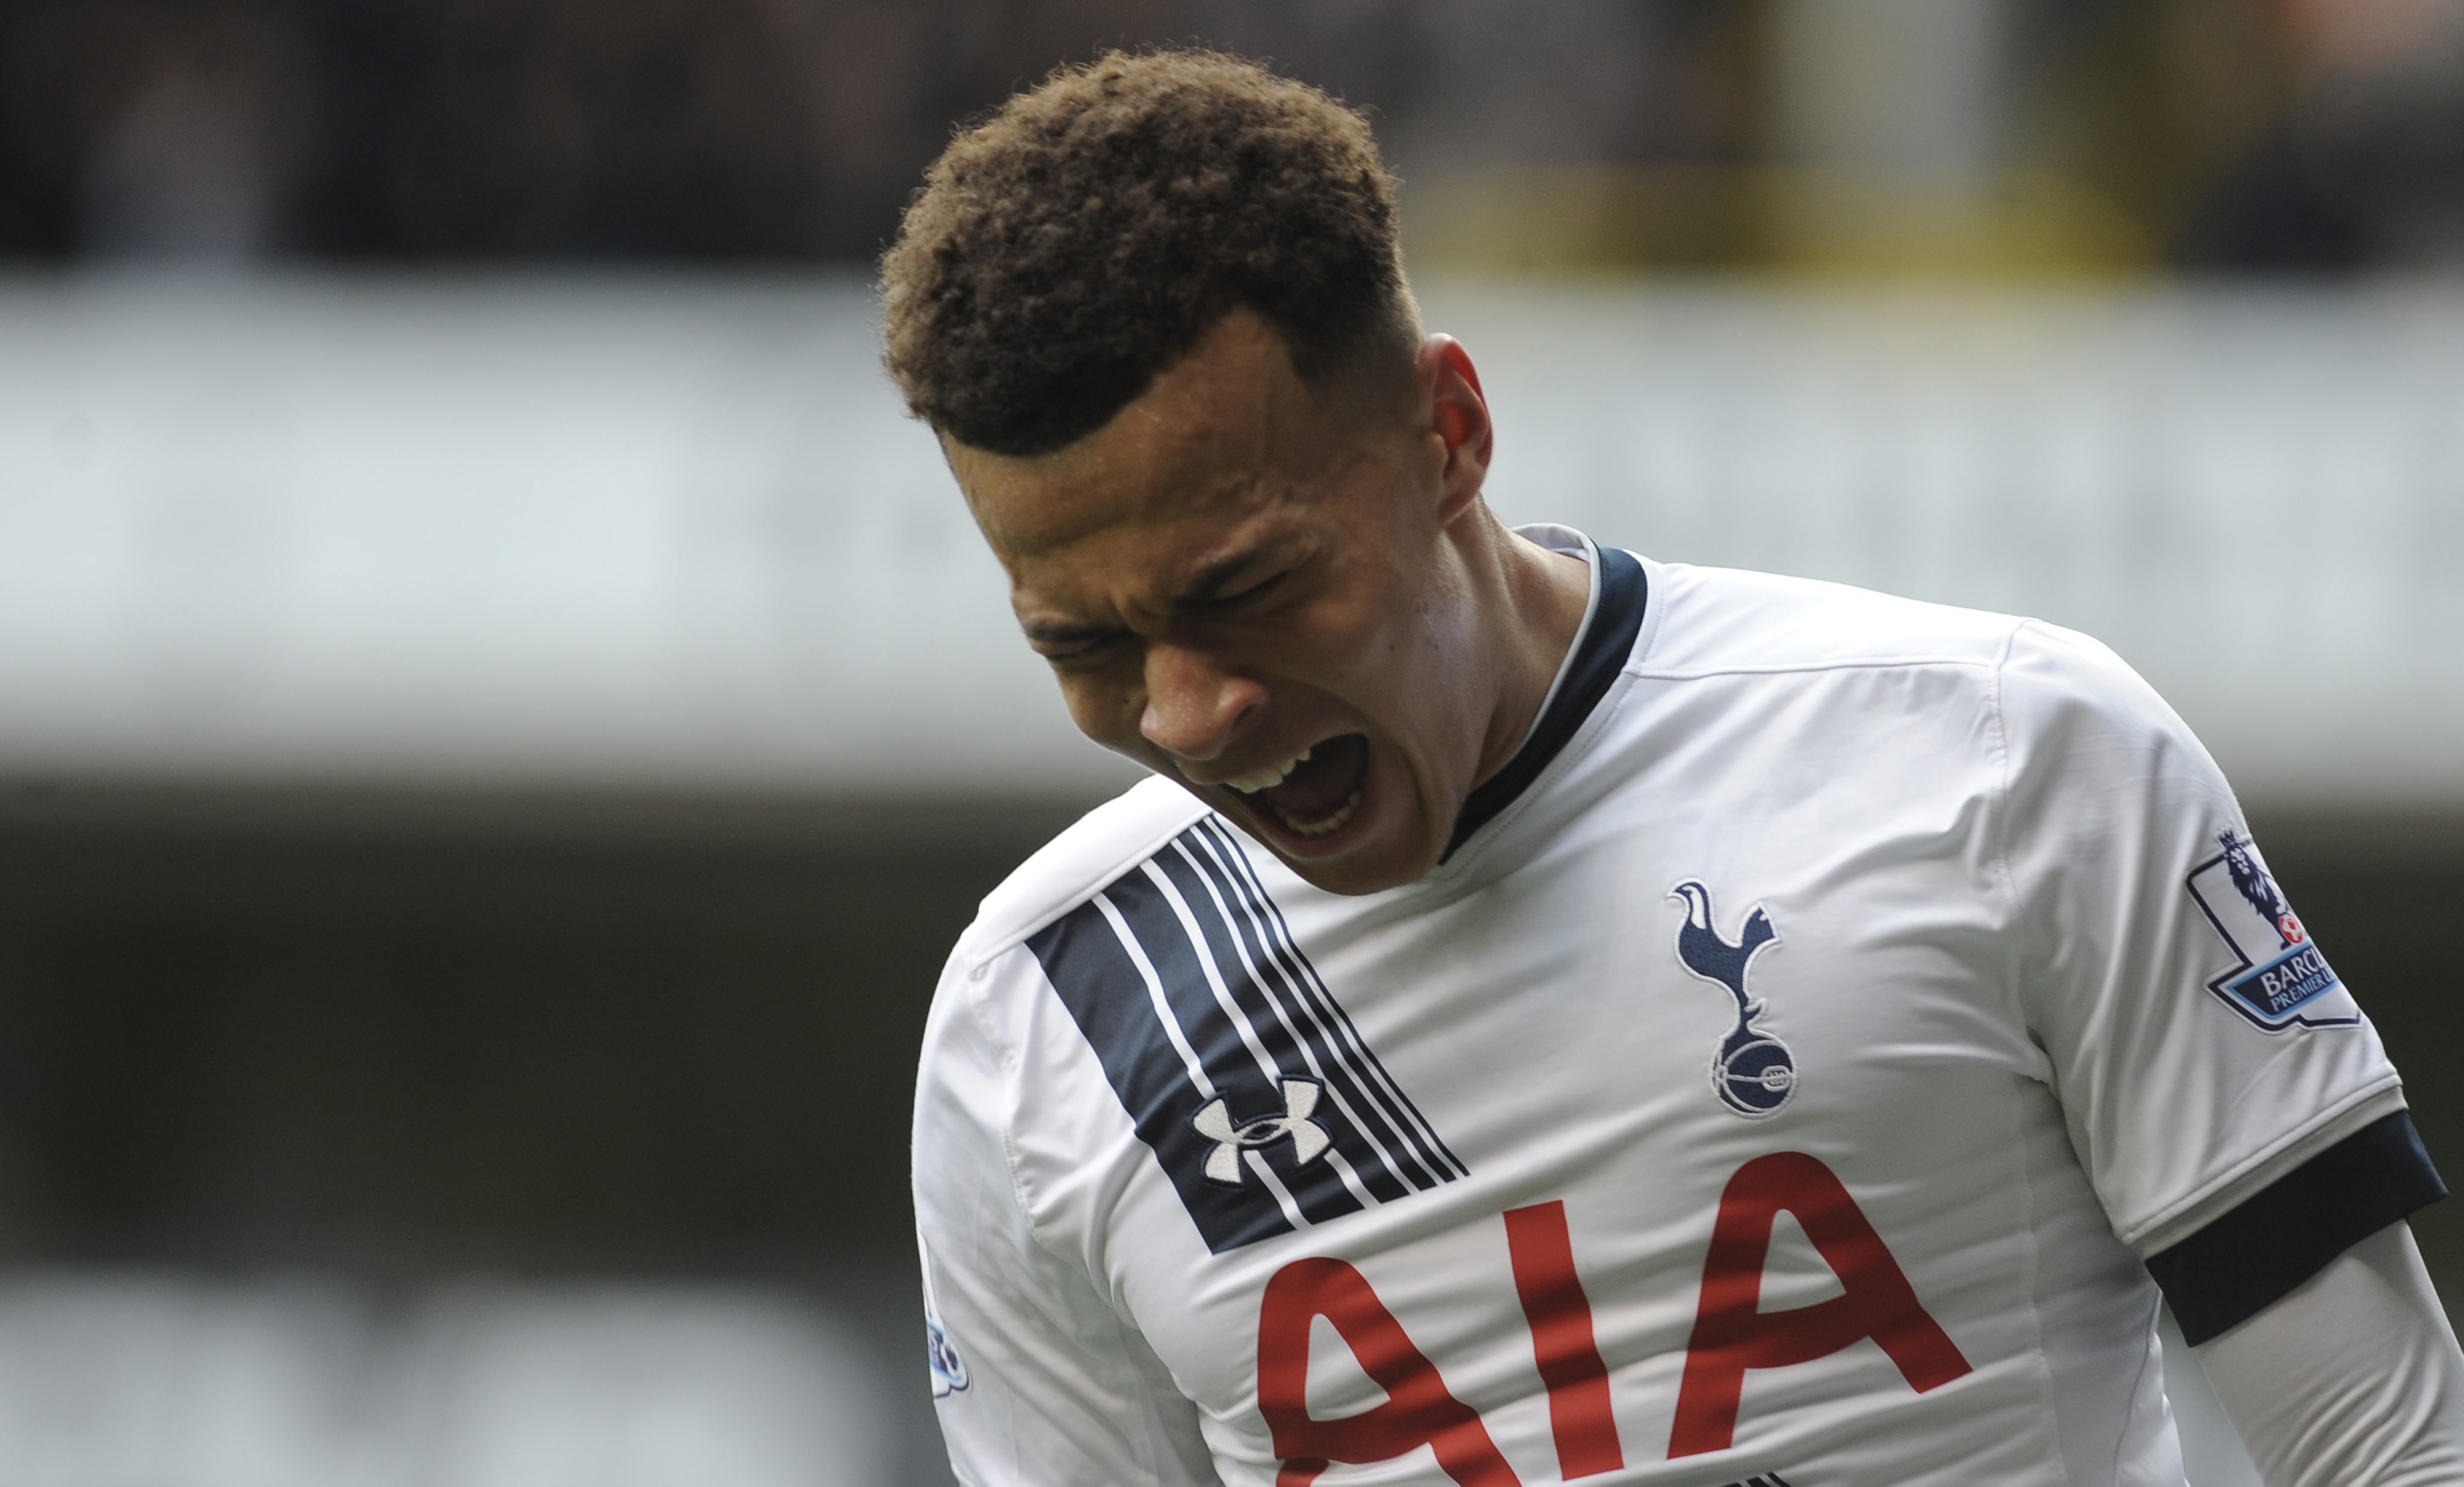 epa05253115 Dele Alli of Tottenham Hotspur celebrates after scoring a goal against Manchester United during the English Premier League soccer match between Tottenham Hotspur and Manchester United at White Hart Lane in London, Britain, 10 April 2016.  EPA/GERRY PENNY EDITORIAL USE ONLY. No use with unauthorized audio, video, data, fixture lists, club/league logos or 'live' services. Online in-match use limited to 75 images, no video emulation. No use in betting, games or single club/league/player publications.